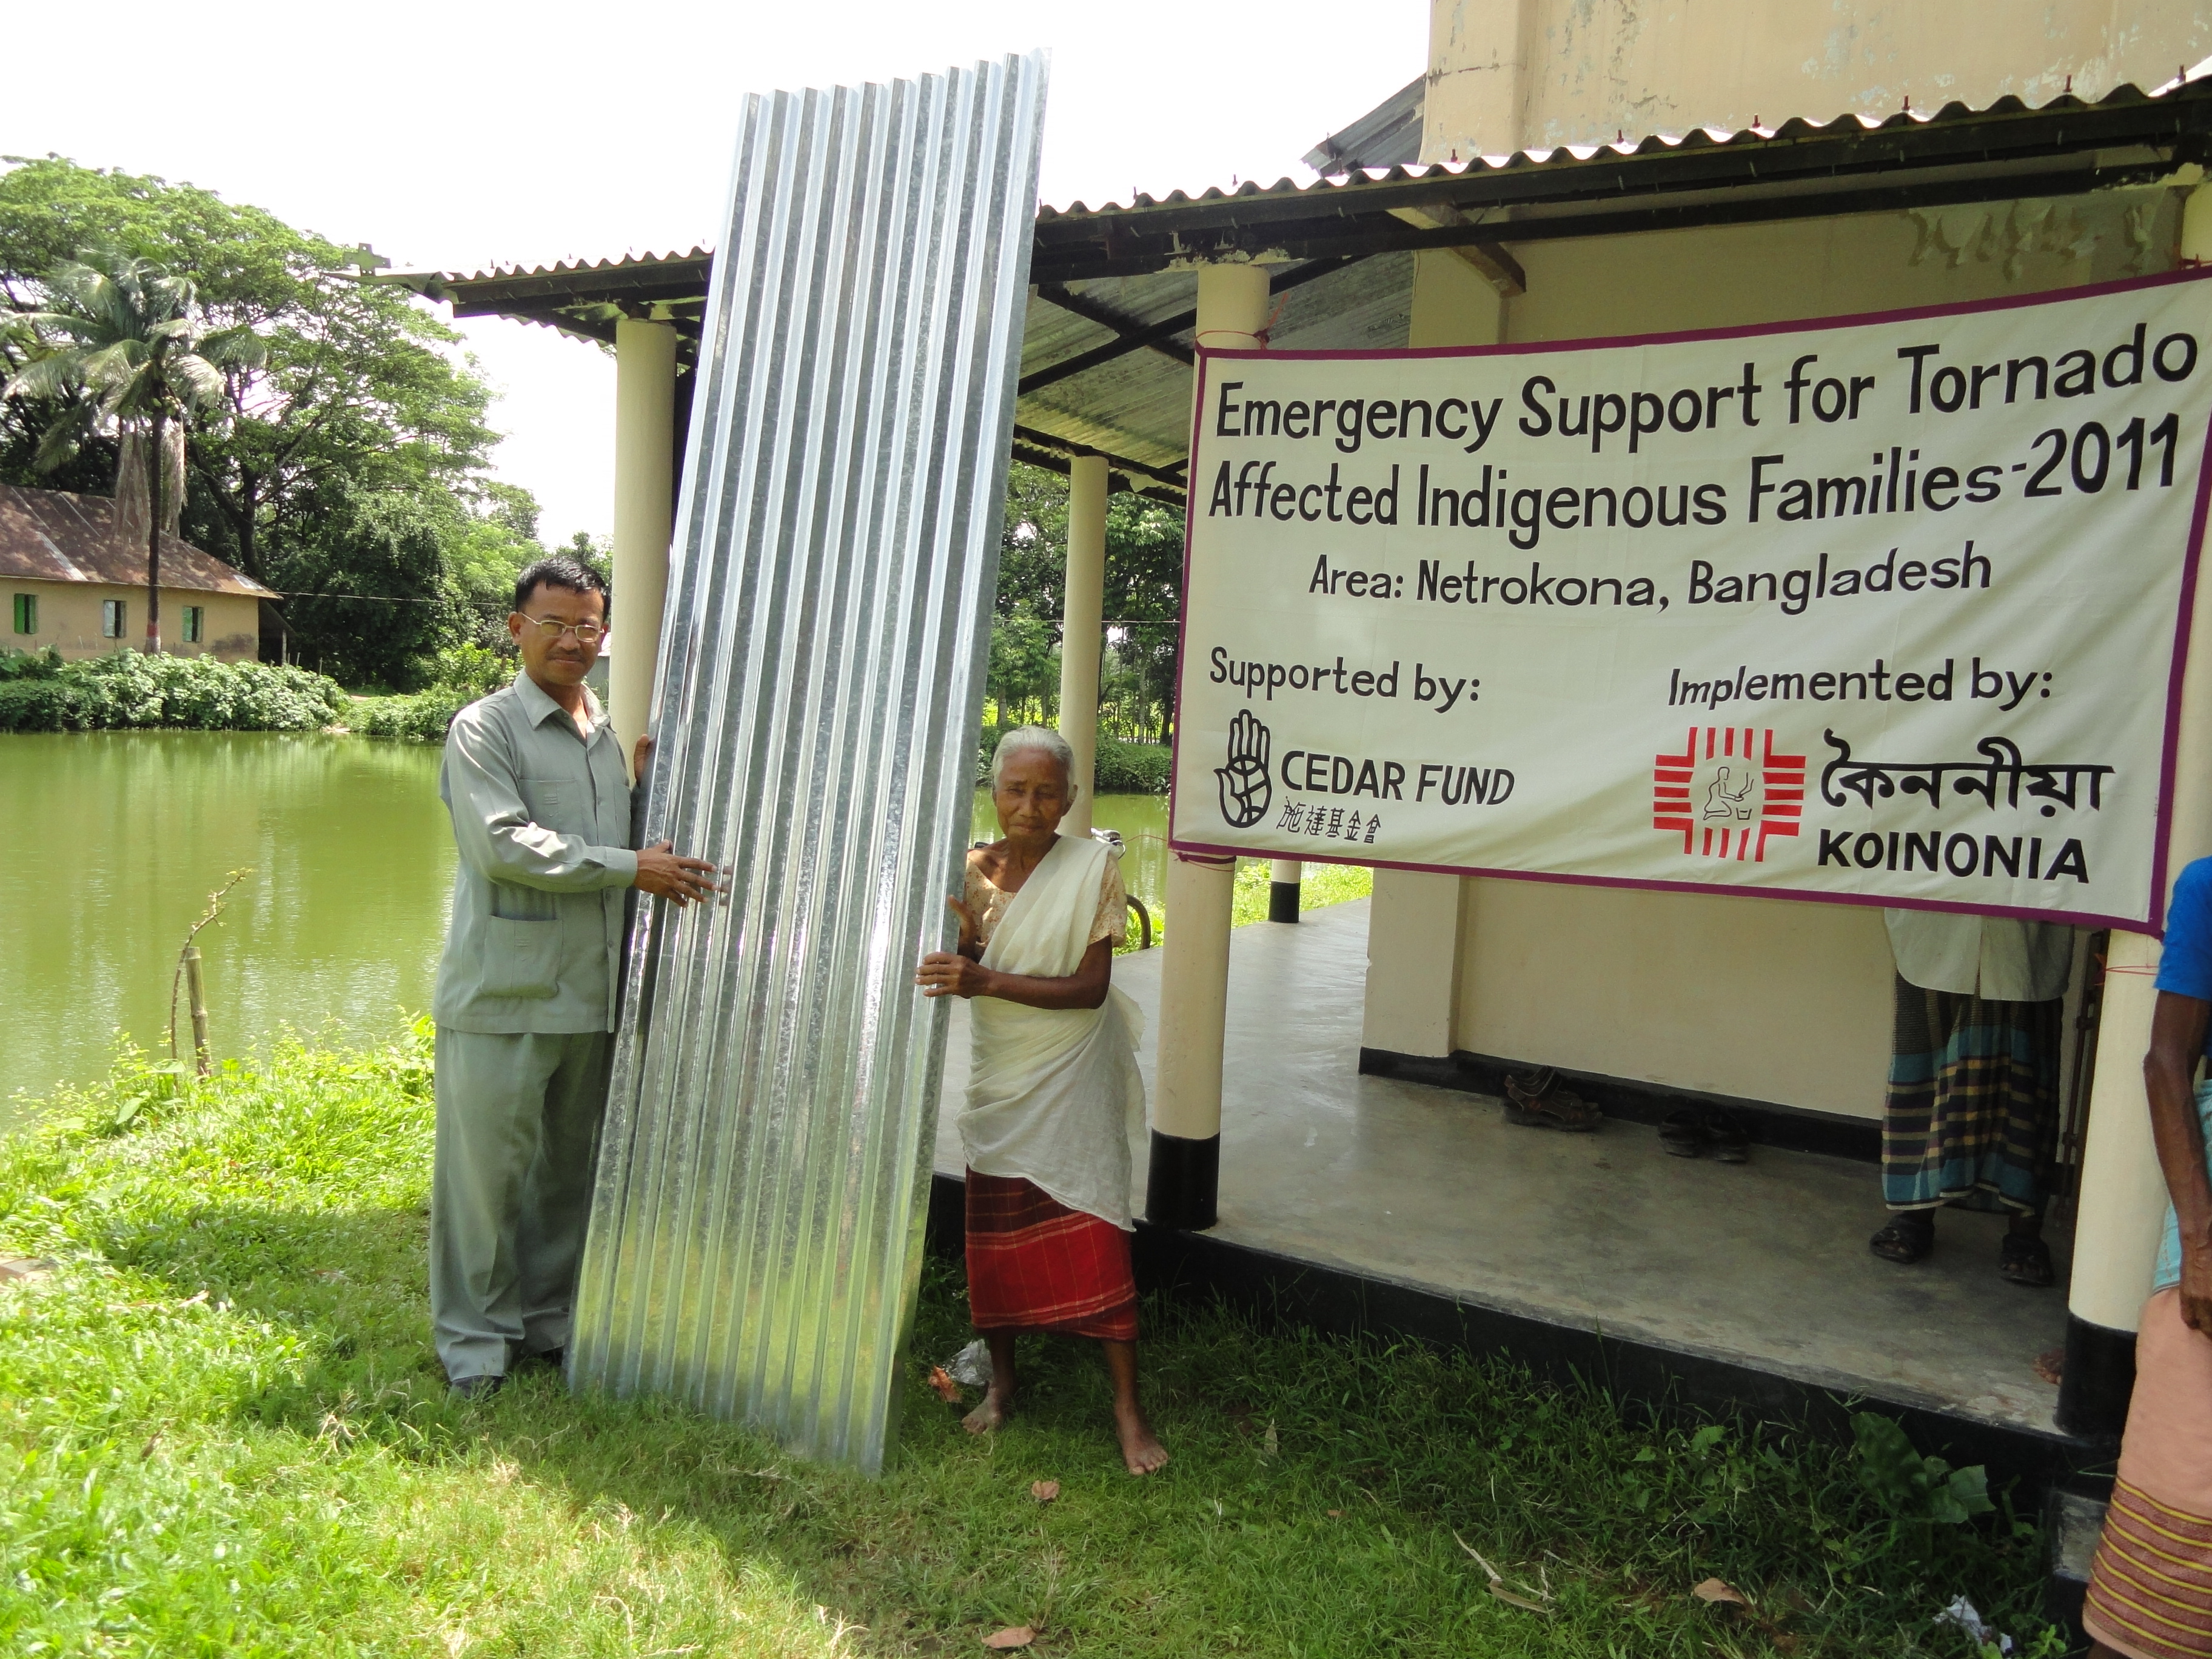 Emergency Support for Tornado Affected Indigenous Families– 2011